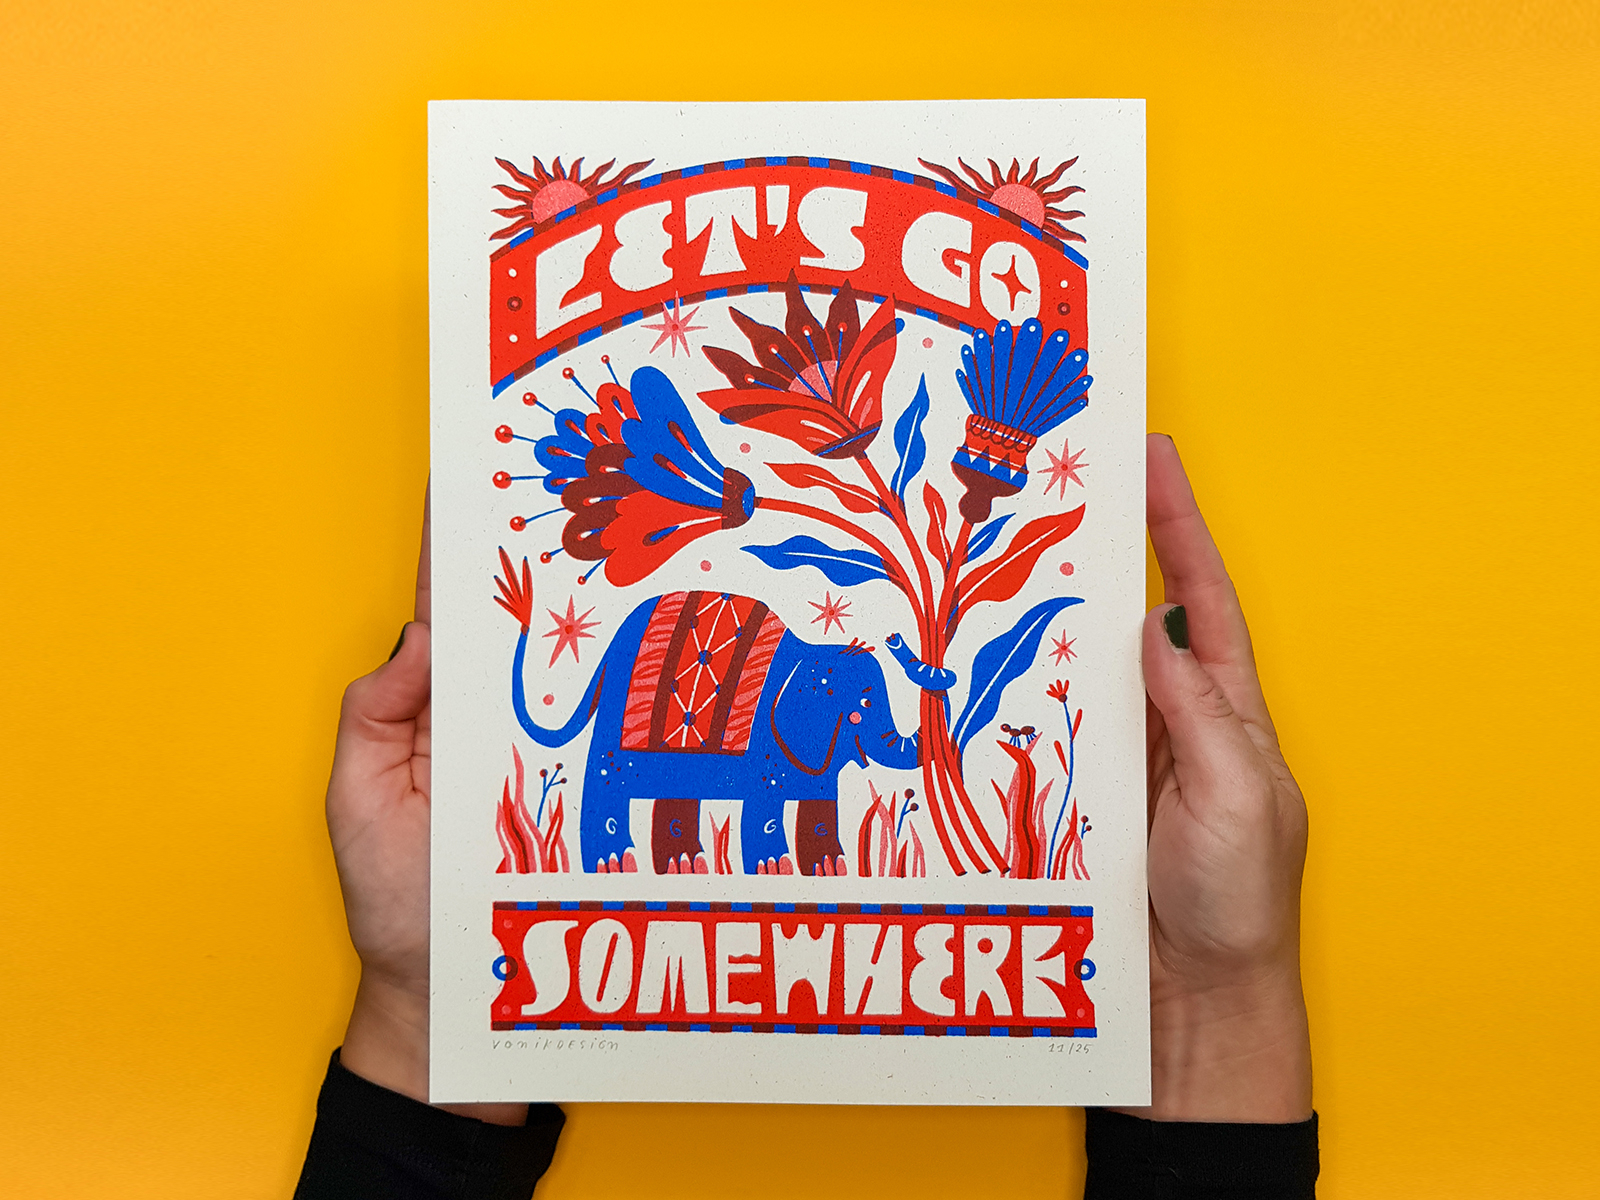 Let's go somewhere - Riso Print by Esther on Dribbble